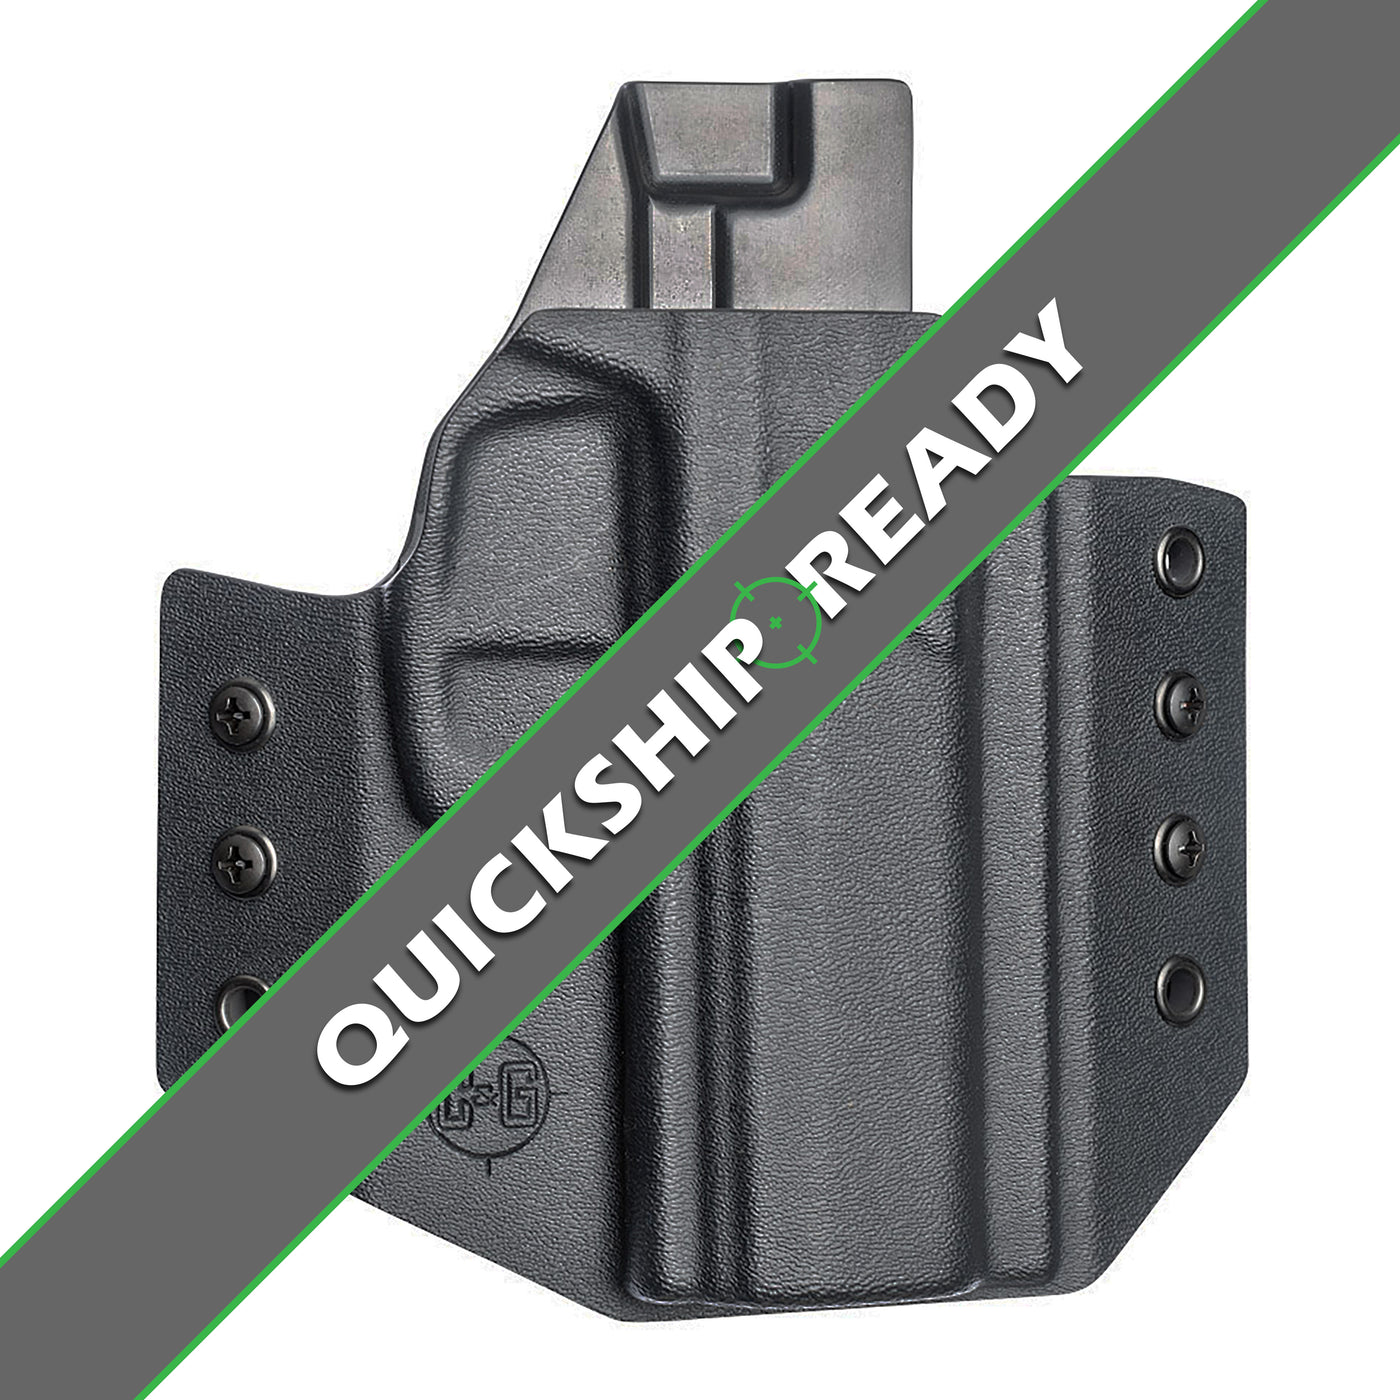 Shown is a quickship C&G Holsters OWB Outside the waistband Holster for the HK P30.